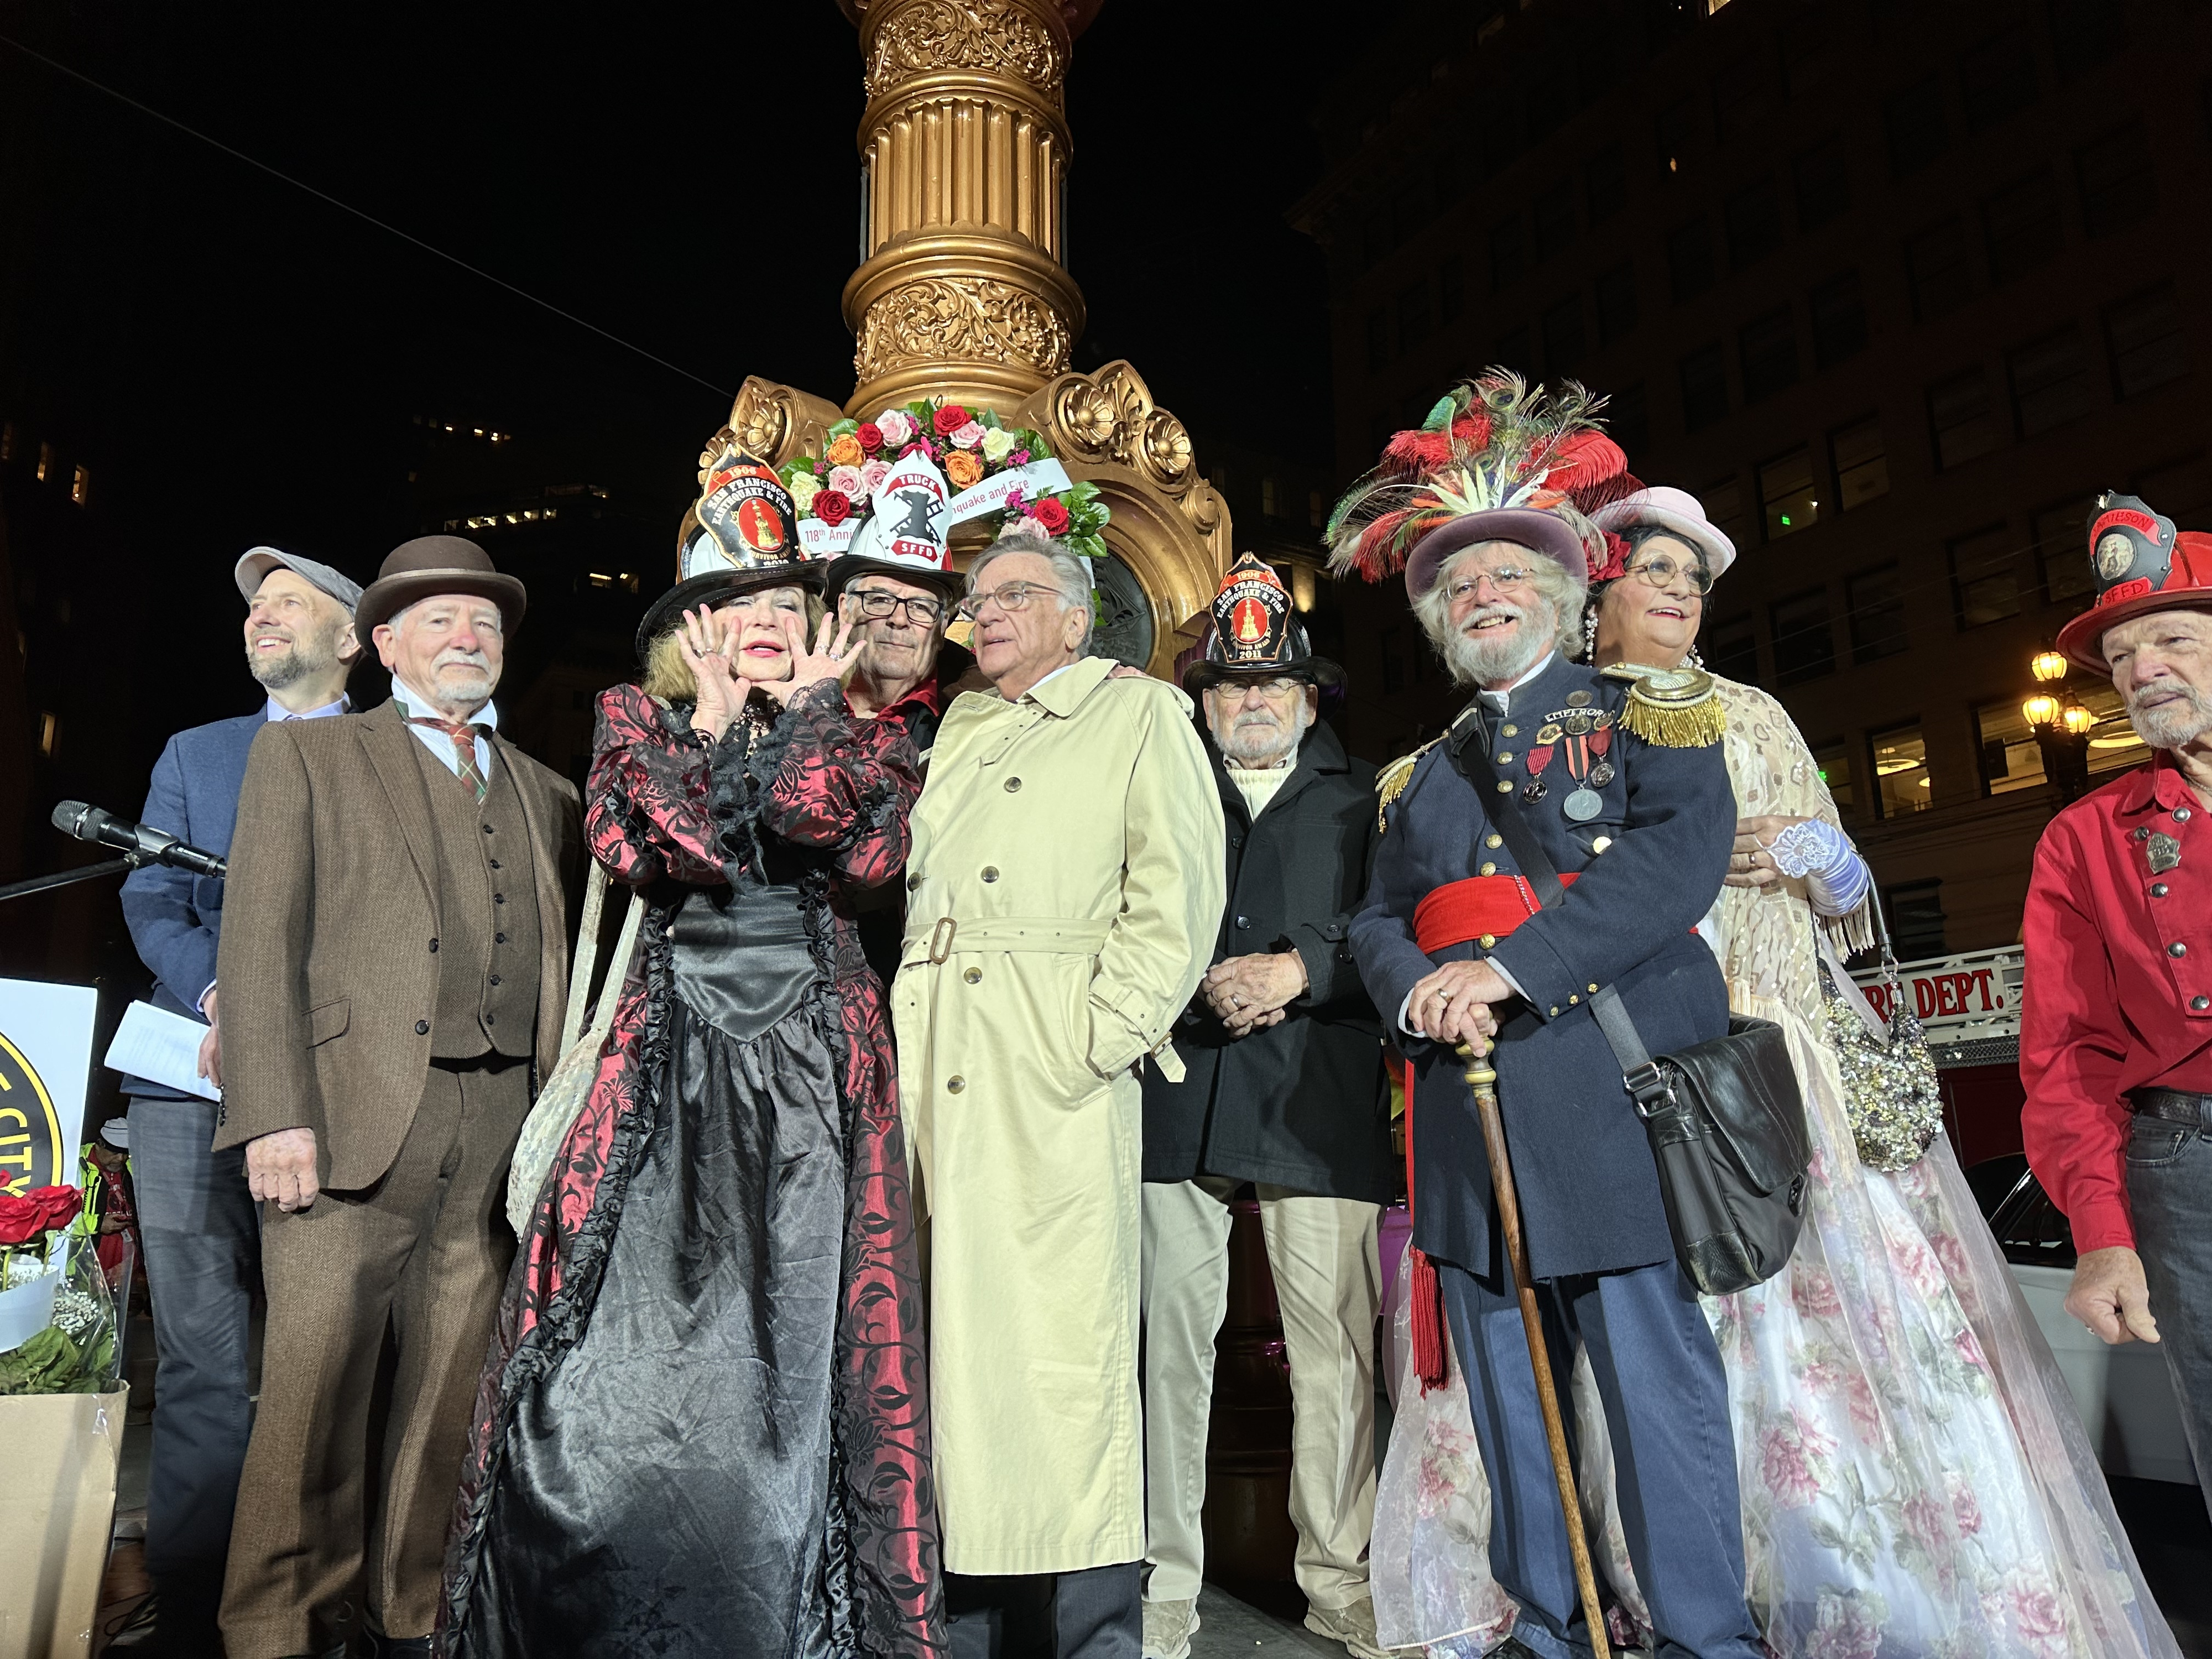 San Francisco Commemorates the 1906 Earthquake and Fire